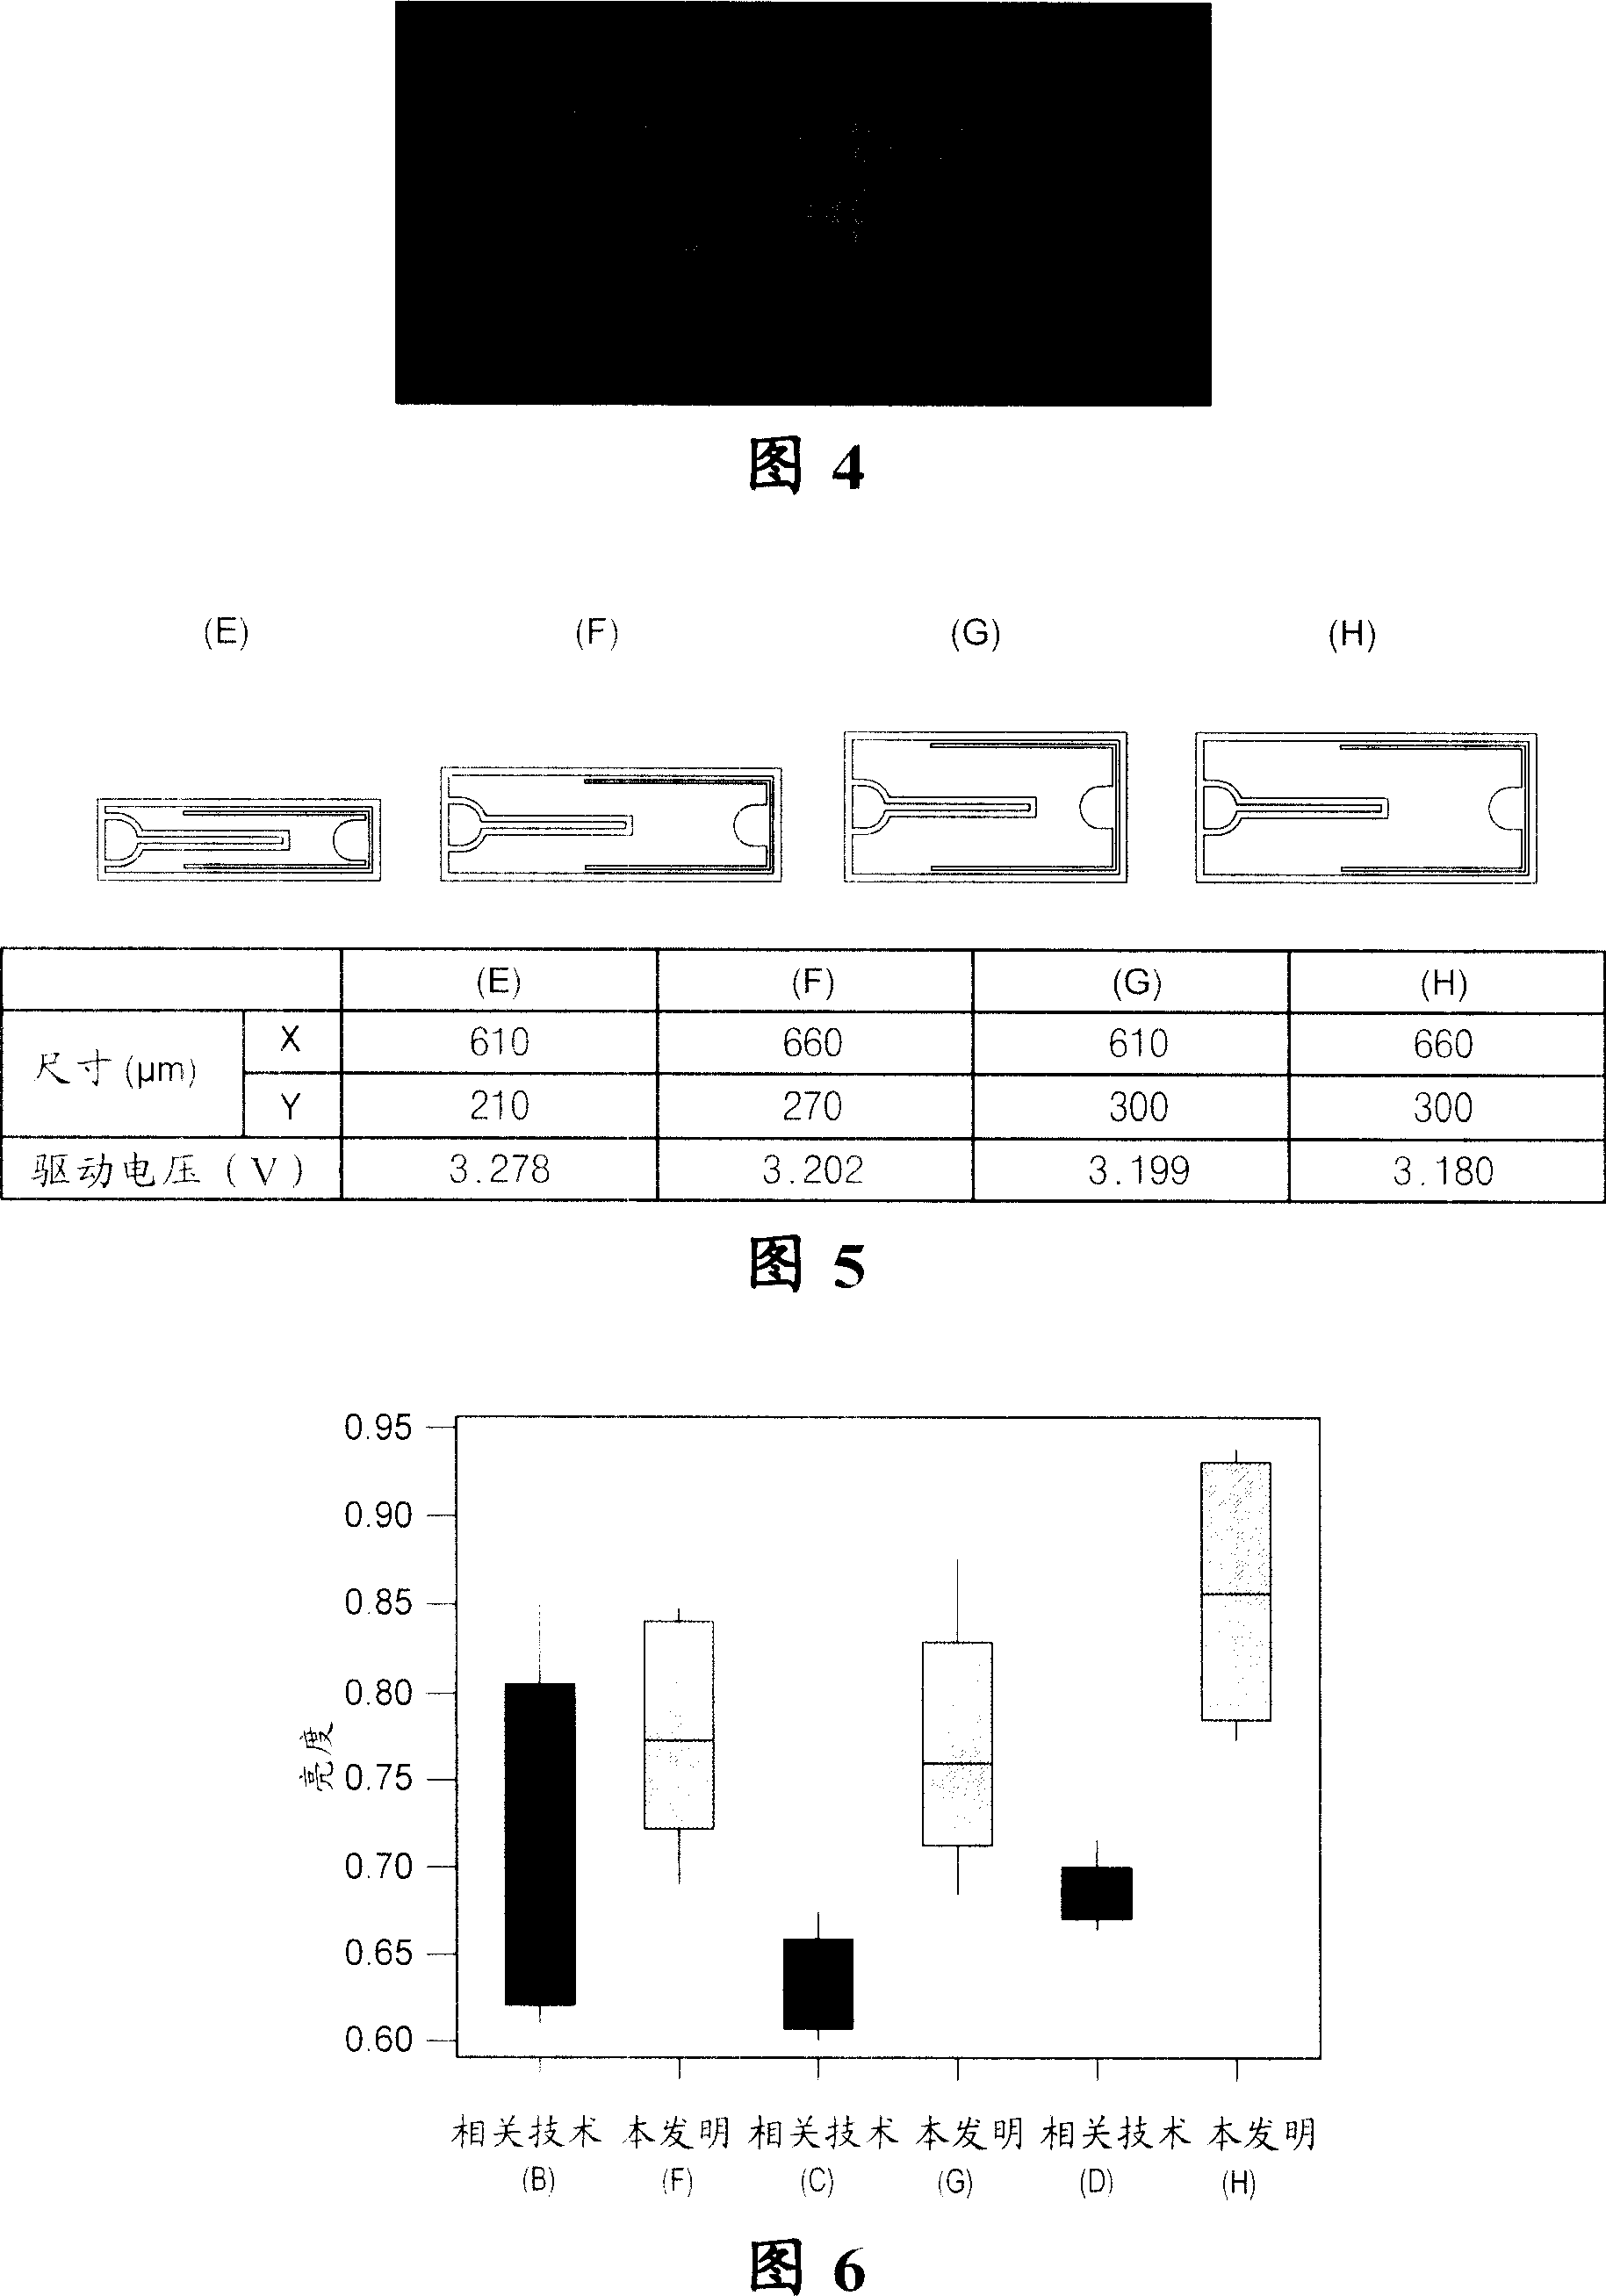 Nitride semiconductor light-emitting diode